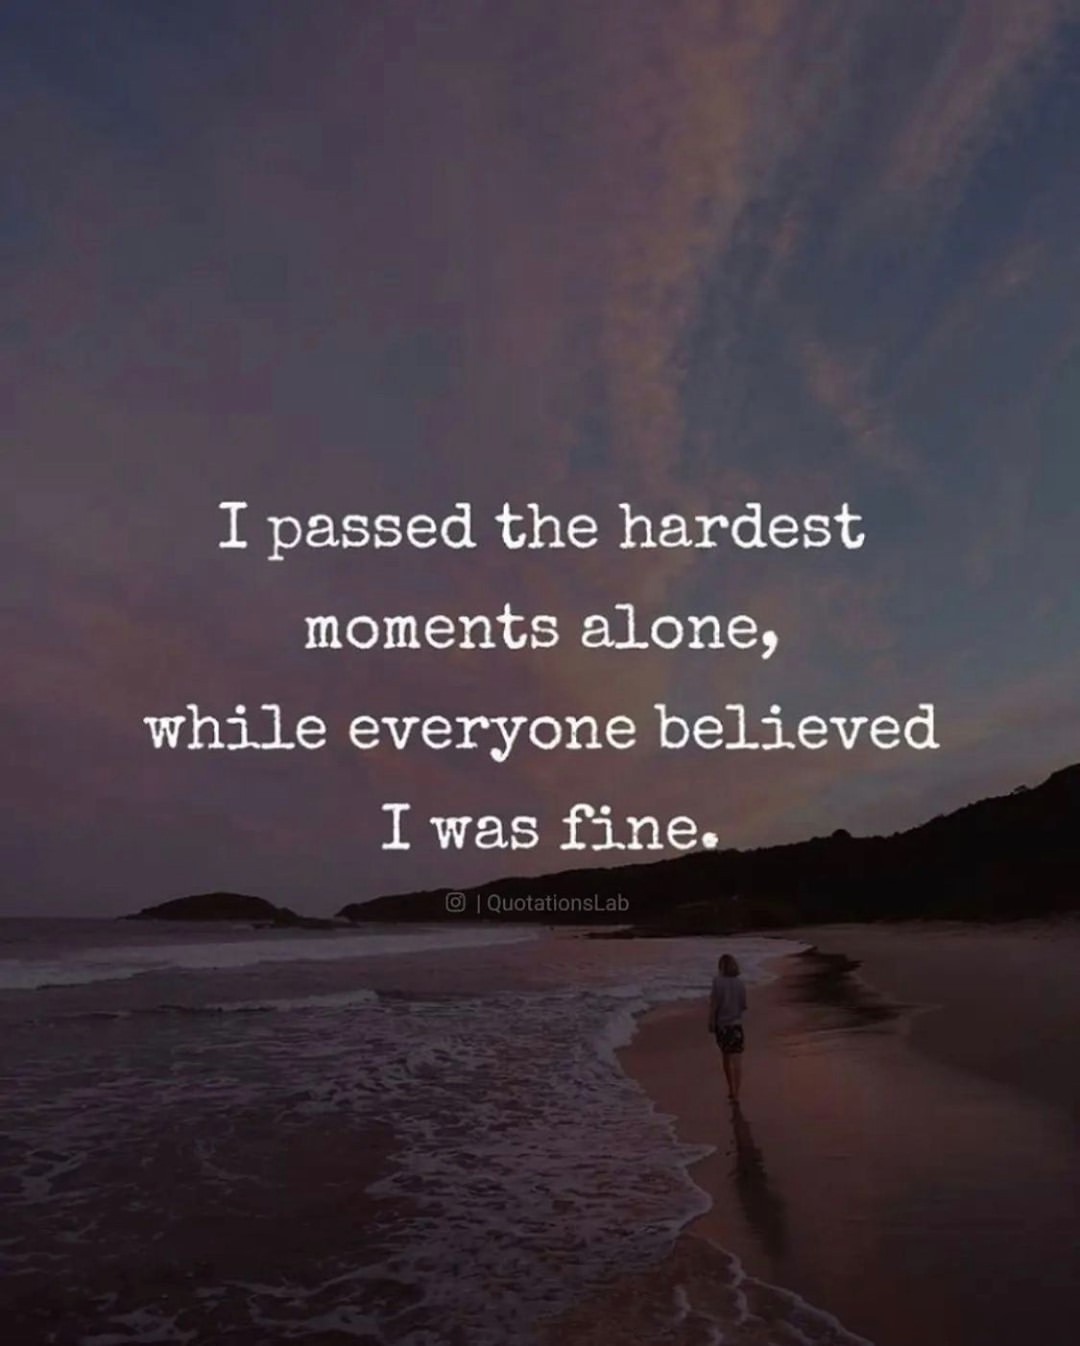 I passed the hardest moments alone, while everyone believed I was fine.